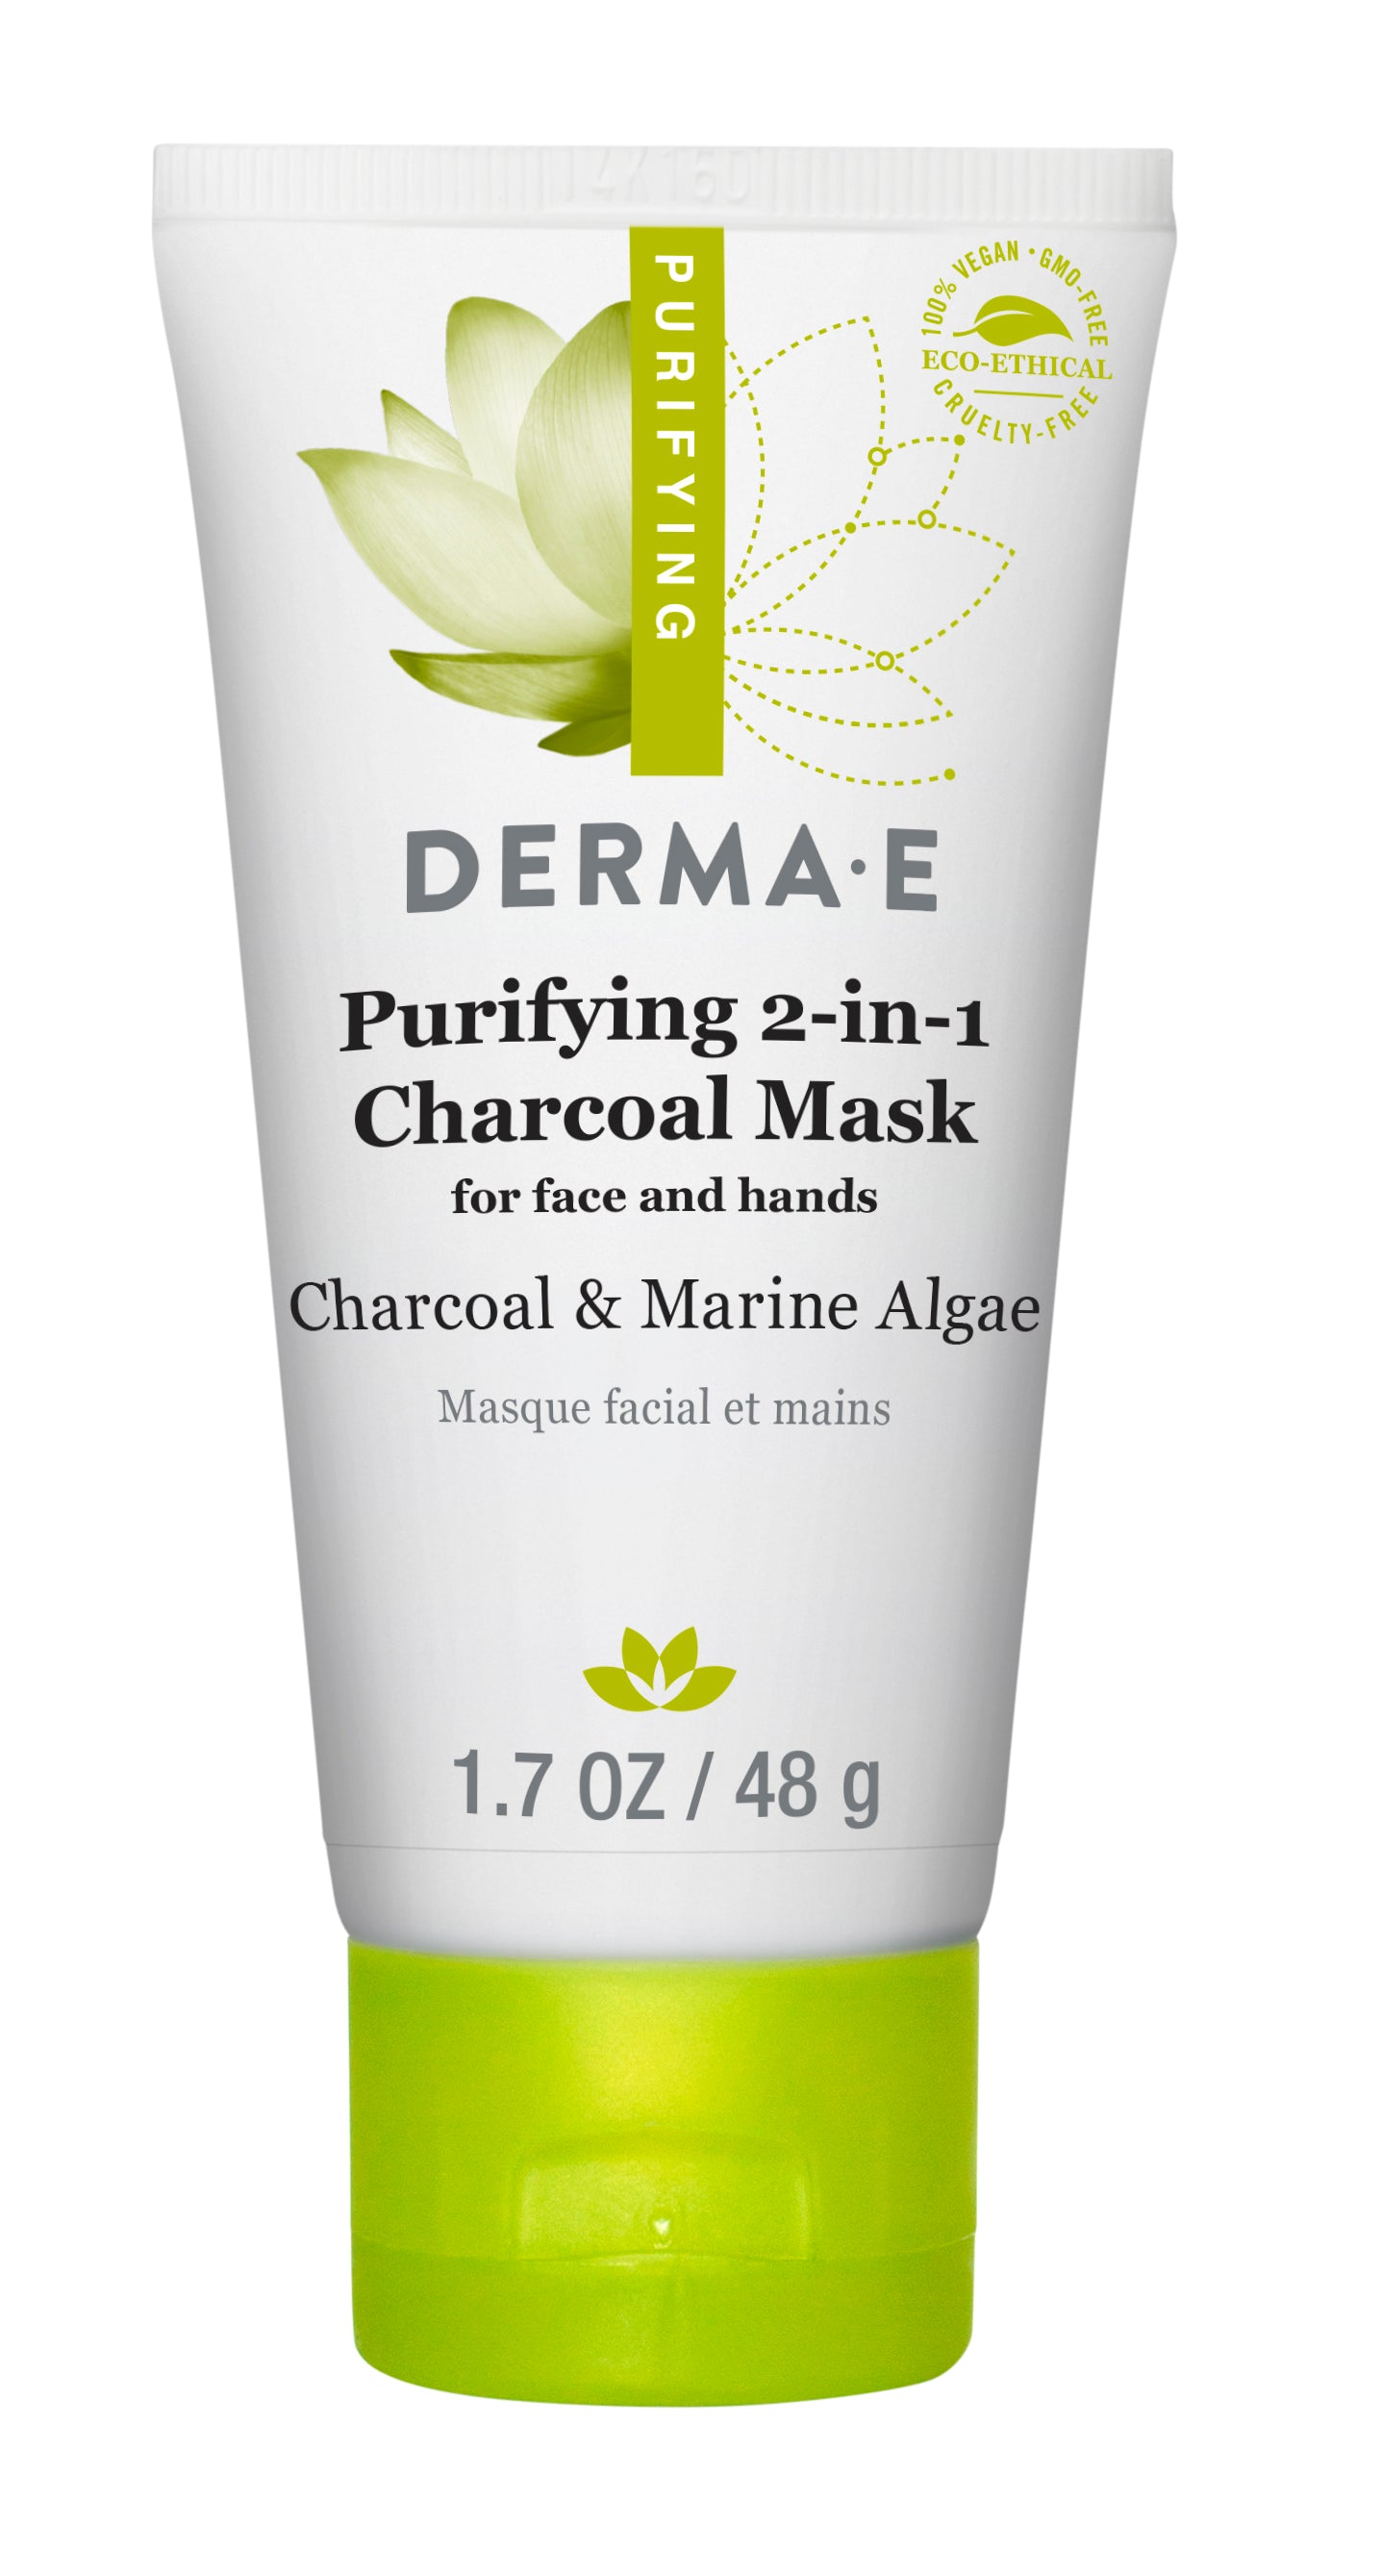 DERMA E Purifying 2-in-1 Charcoal Face Mask